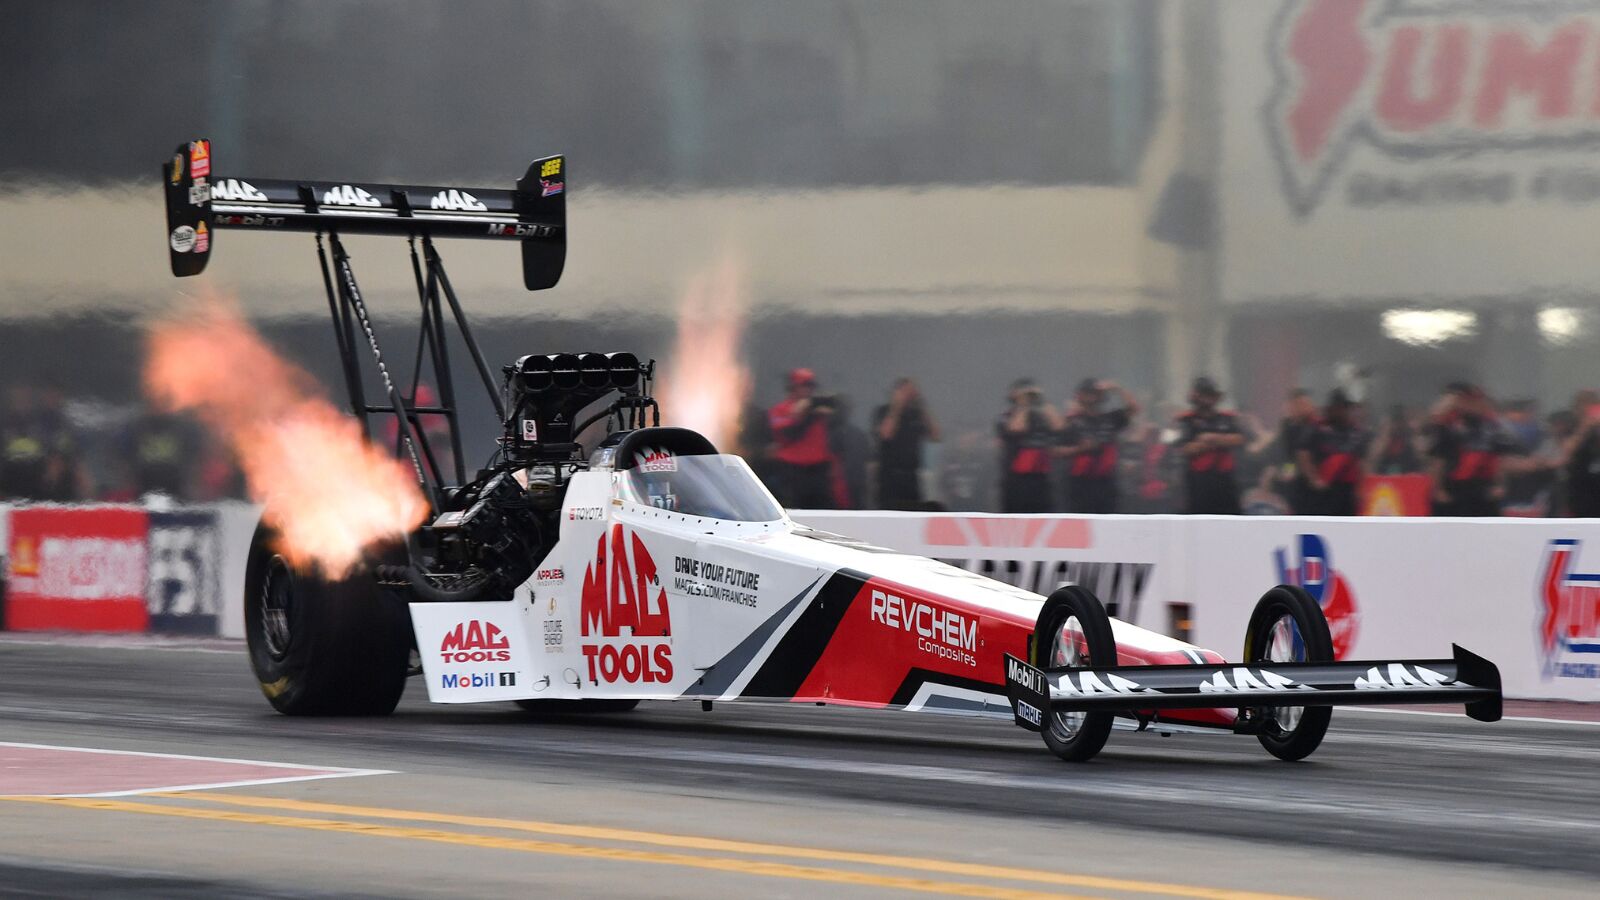 Kalitta, J. Force, Anderson and Herrera Pick Up No. 1 Qualifiers at NHRA 4-Wide Nationals in Charlotte